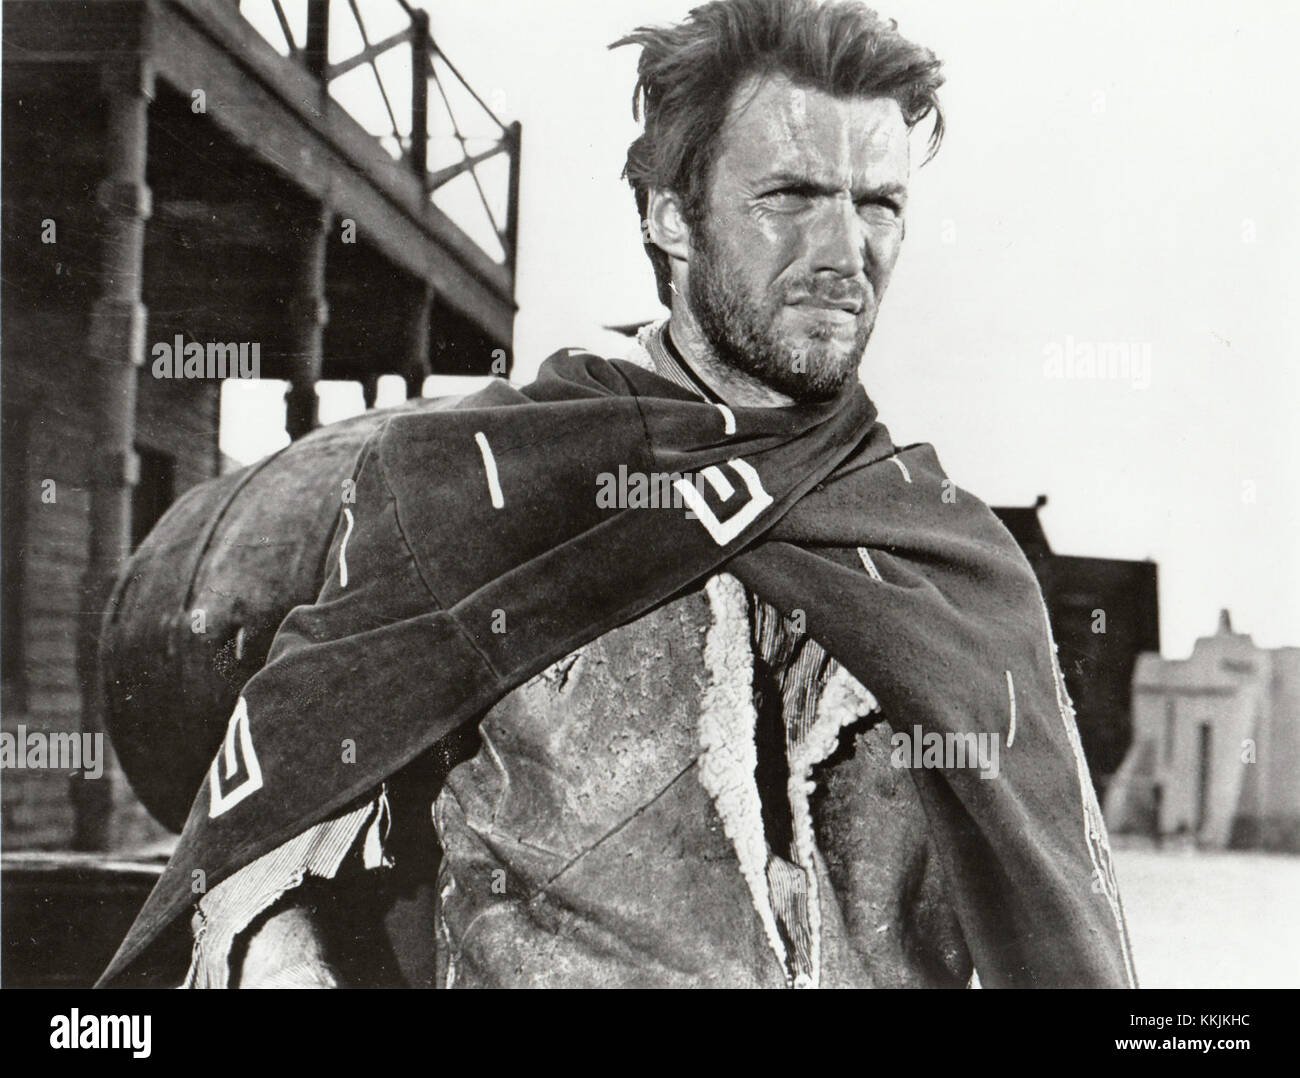 Clint Eastwood - 1960s Stock Photo